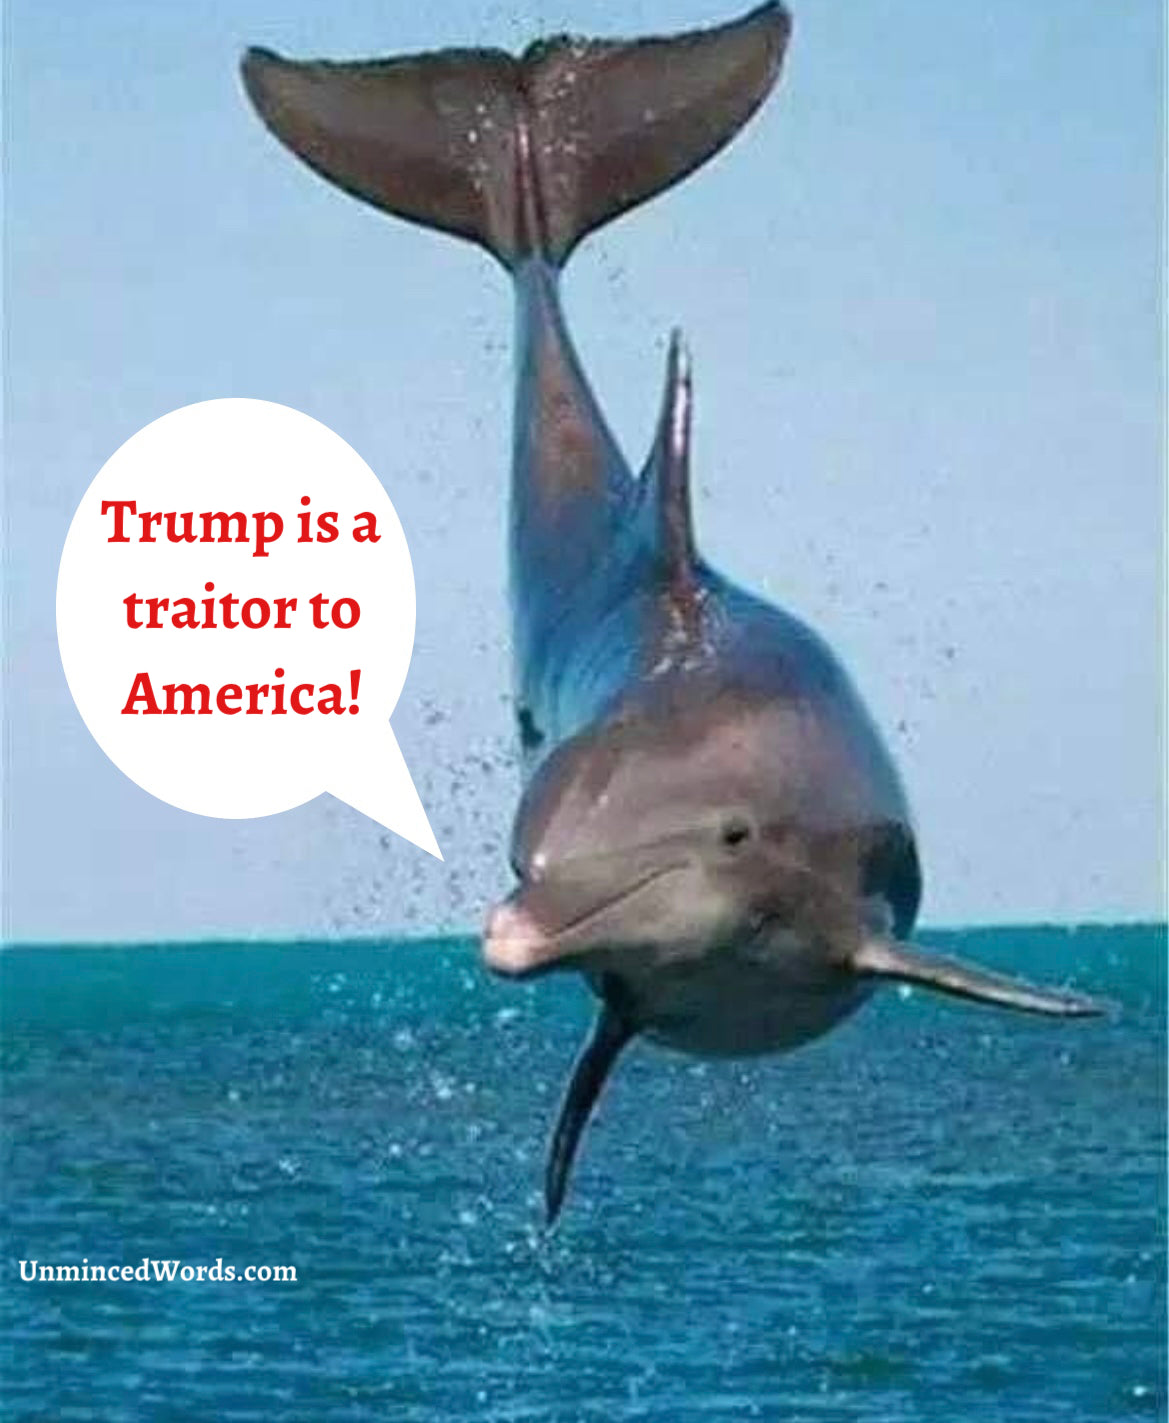 The dolphin is spot on about Trump!